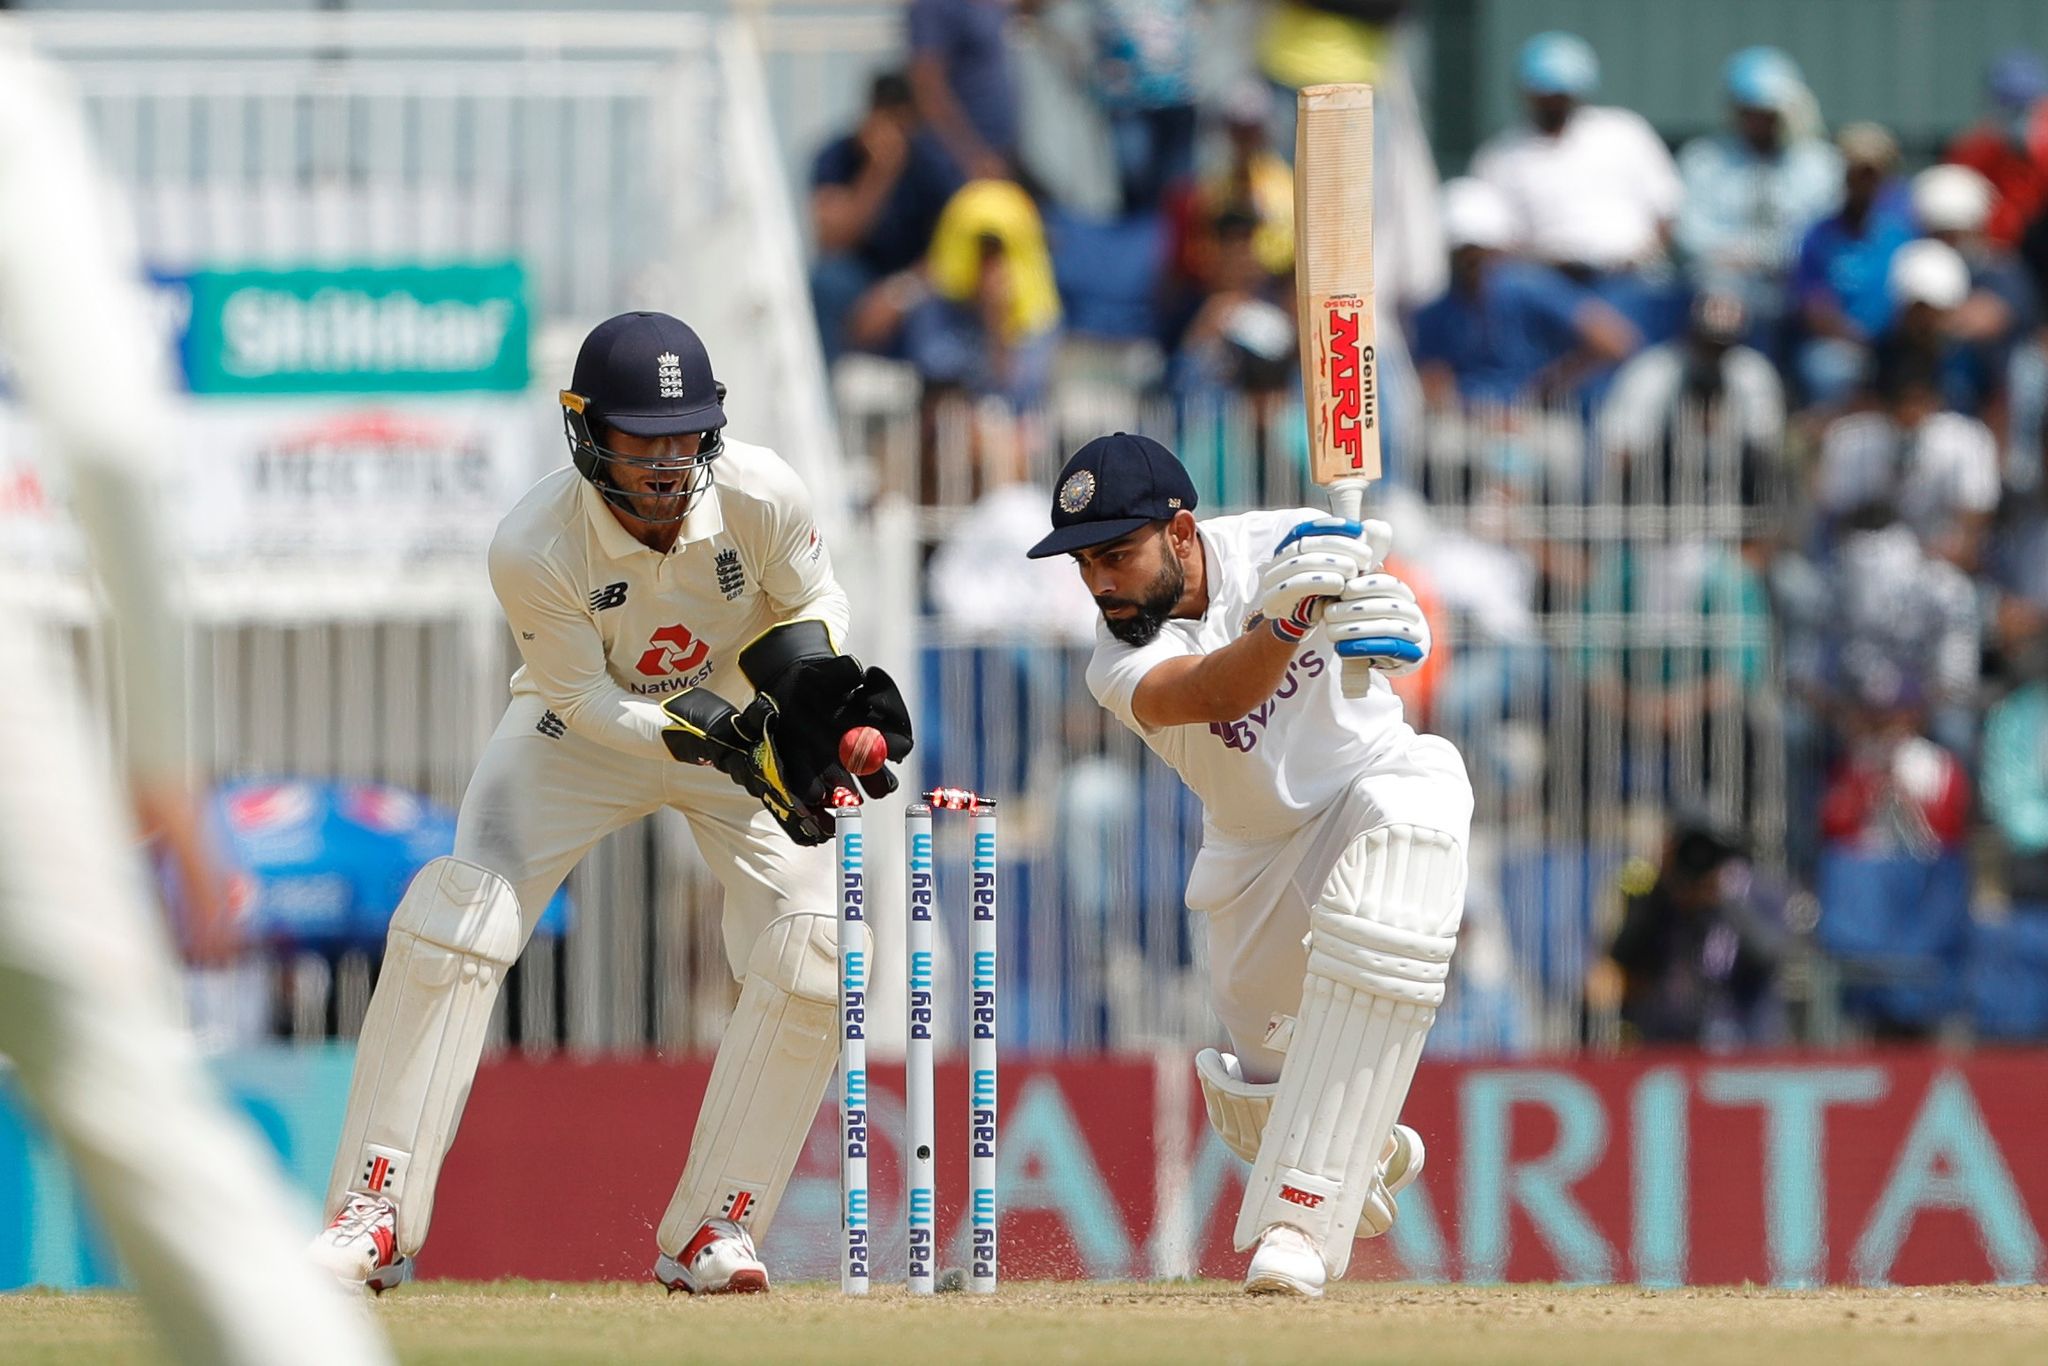 Watch – Virat Kohli Dismissed For A Duck By Moeen Ali